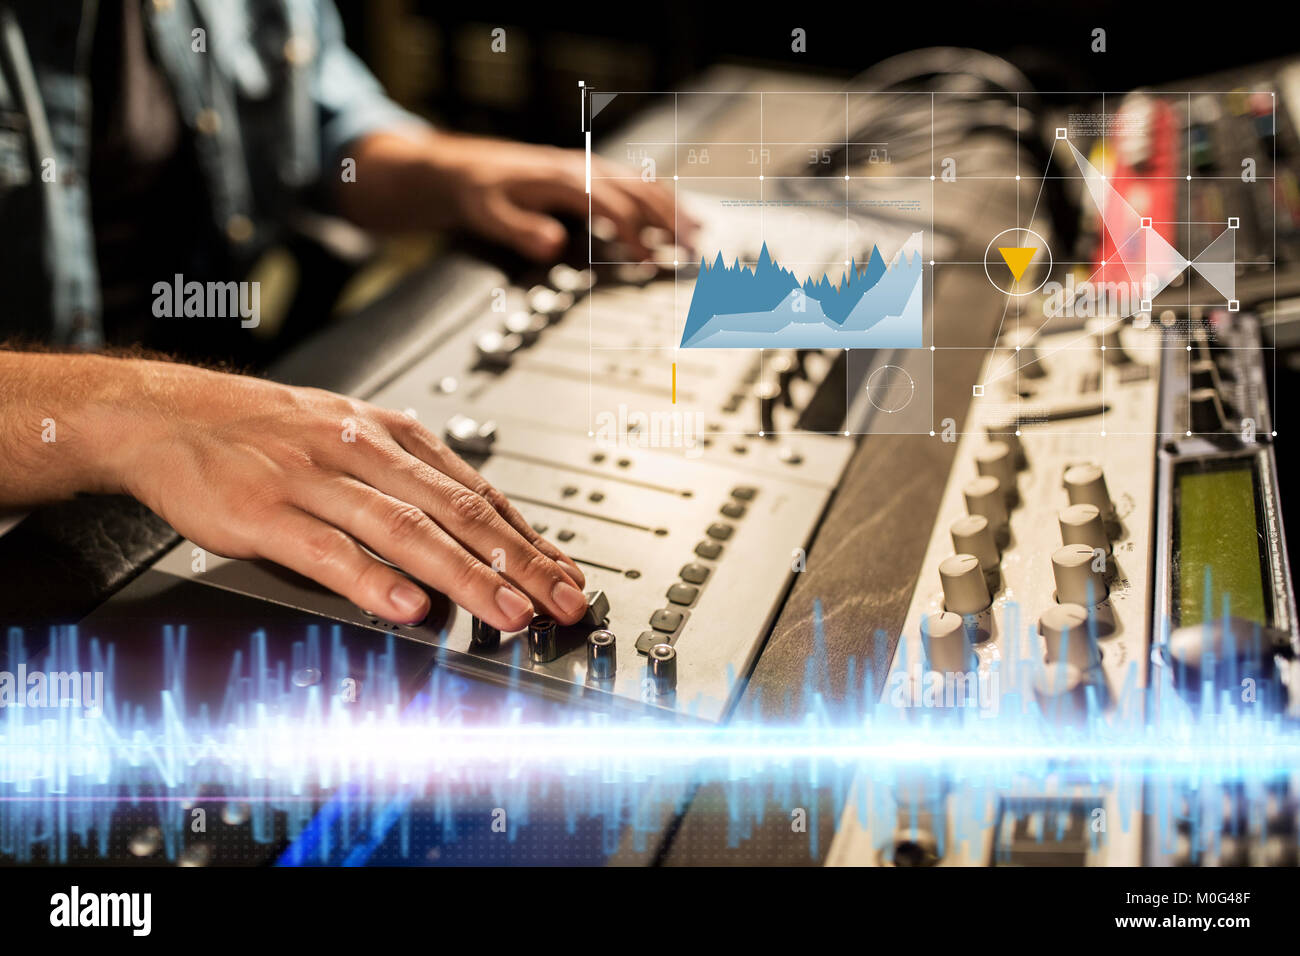 hands on mixing console at sound recording studio Stock Photo